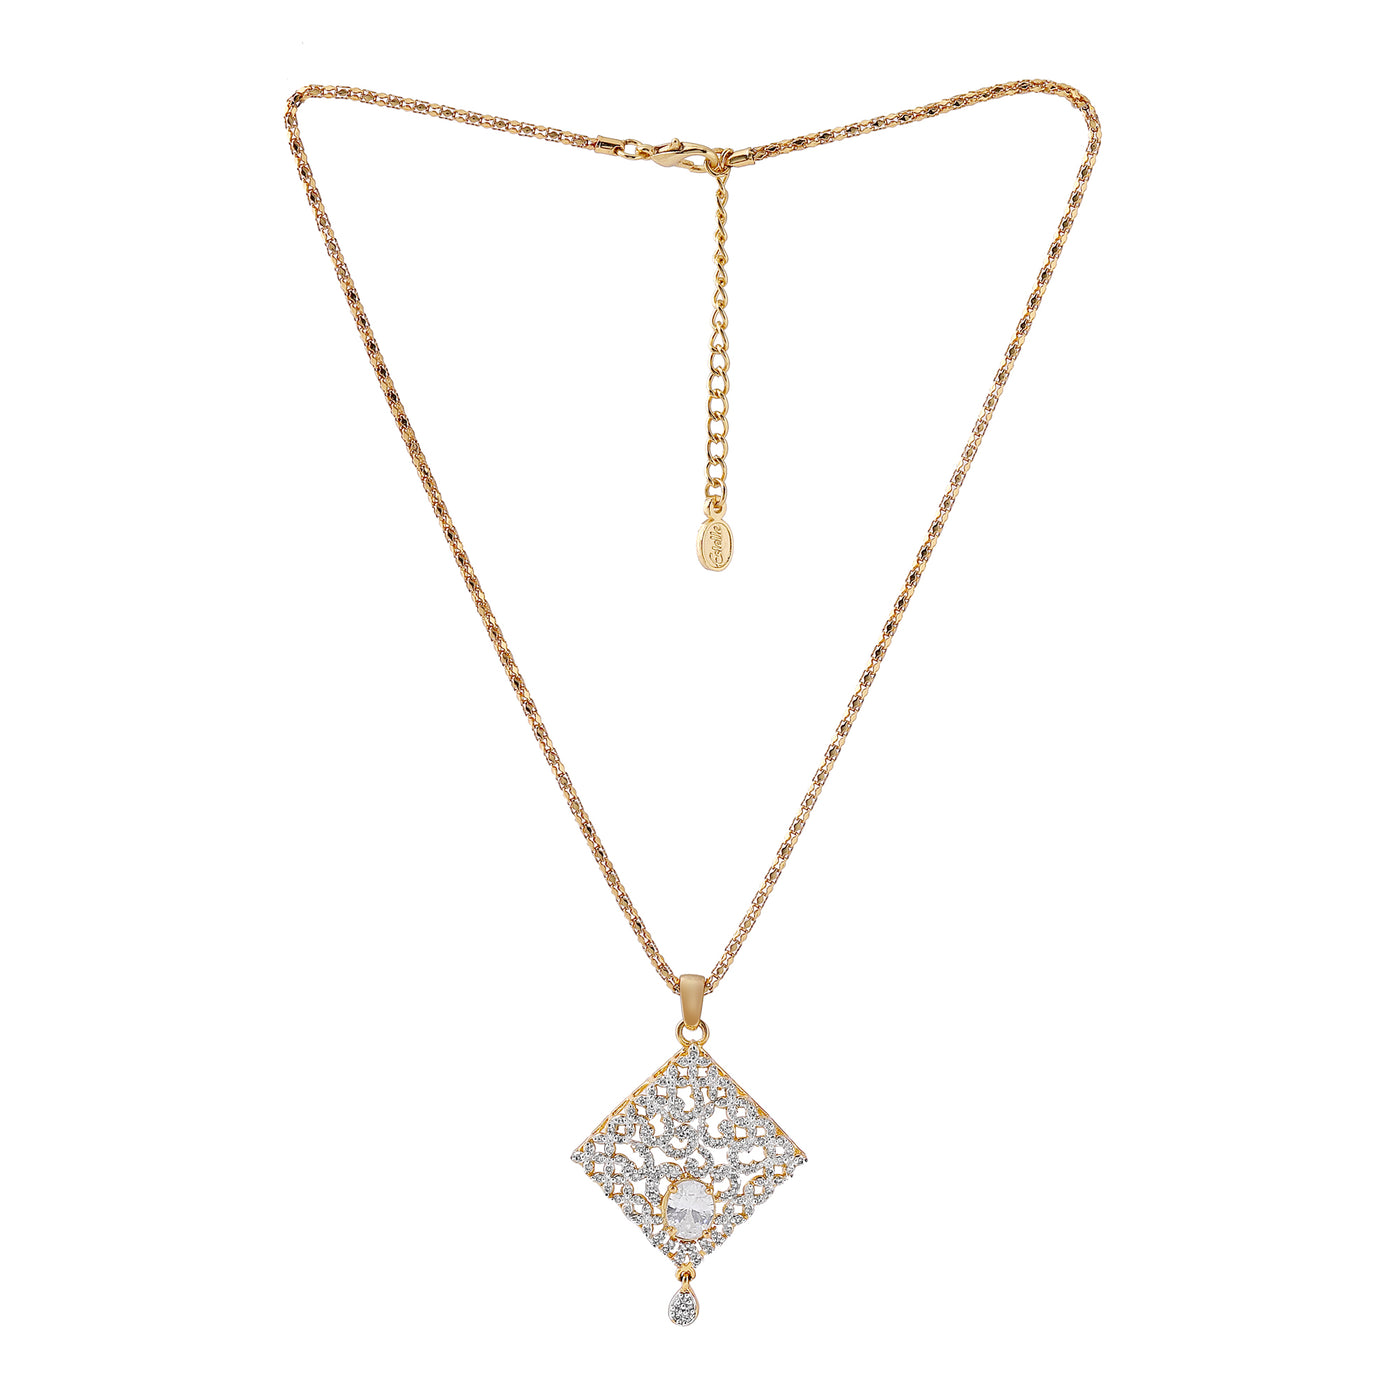 Estele Gold Plated Square Shaped American Diamond Necklace for Women